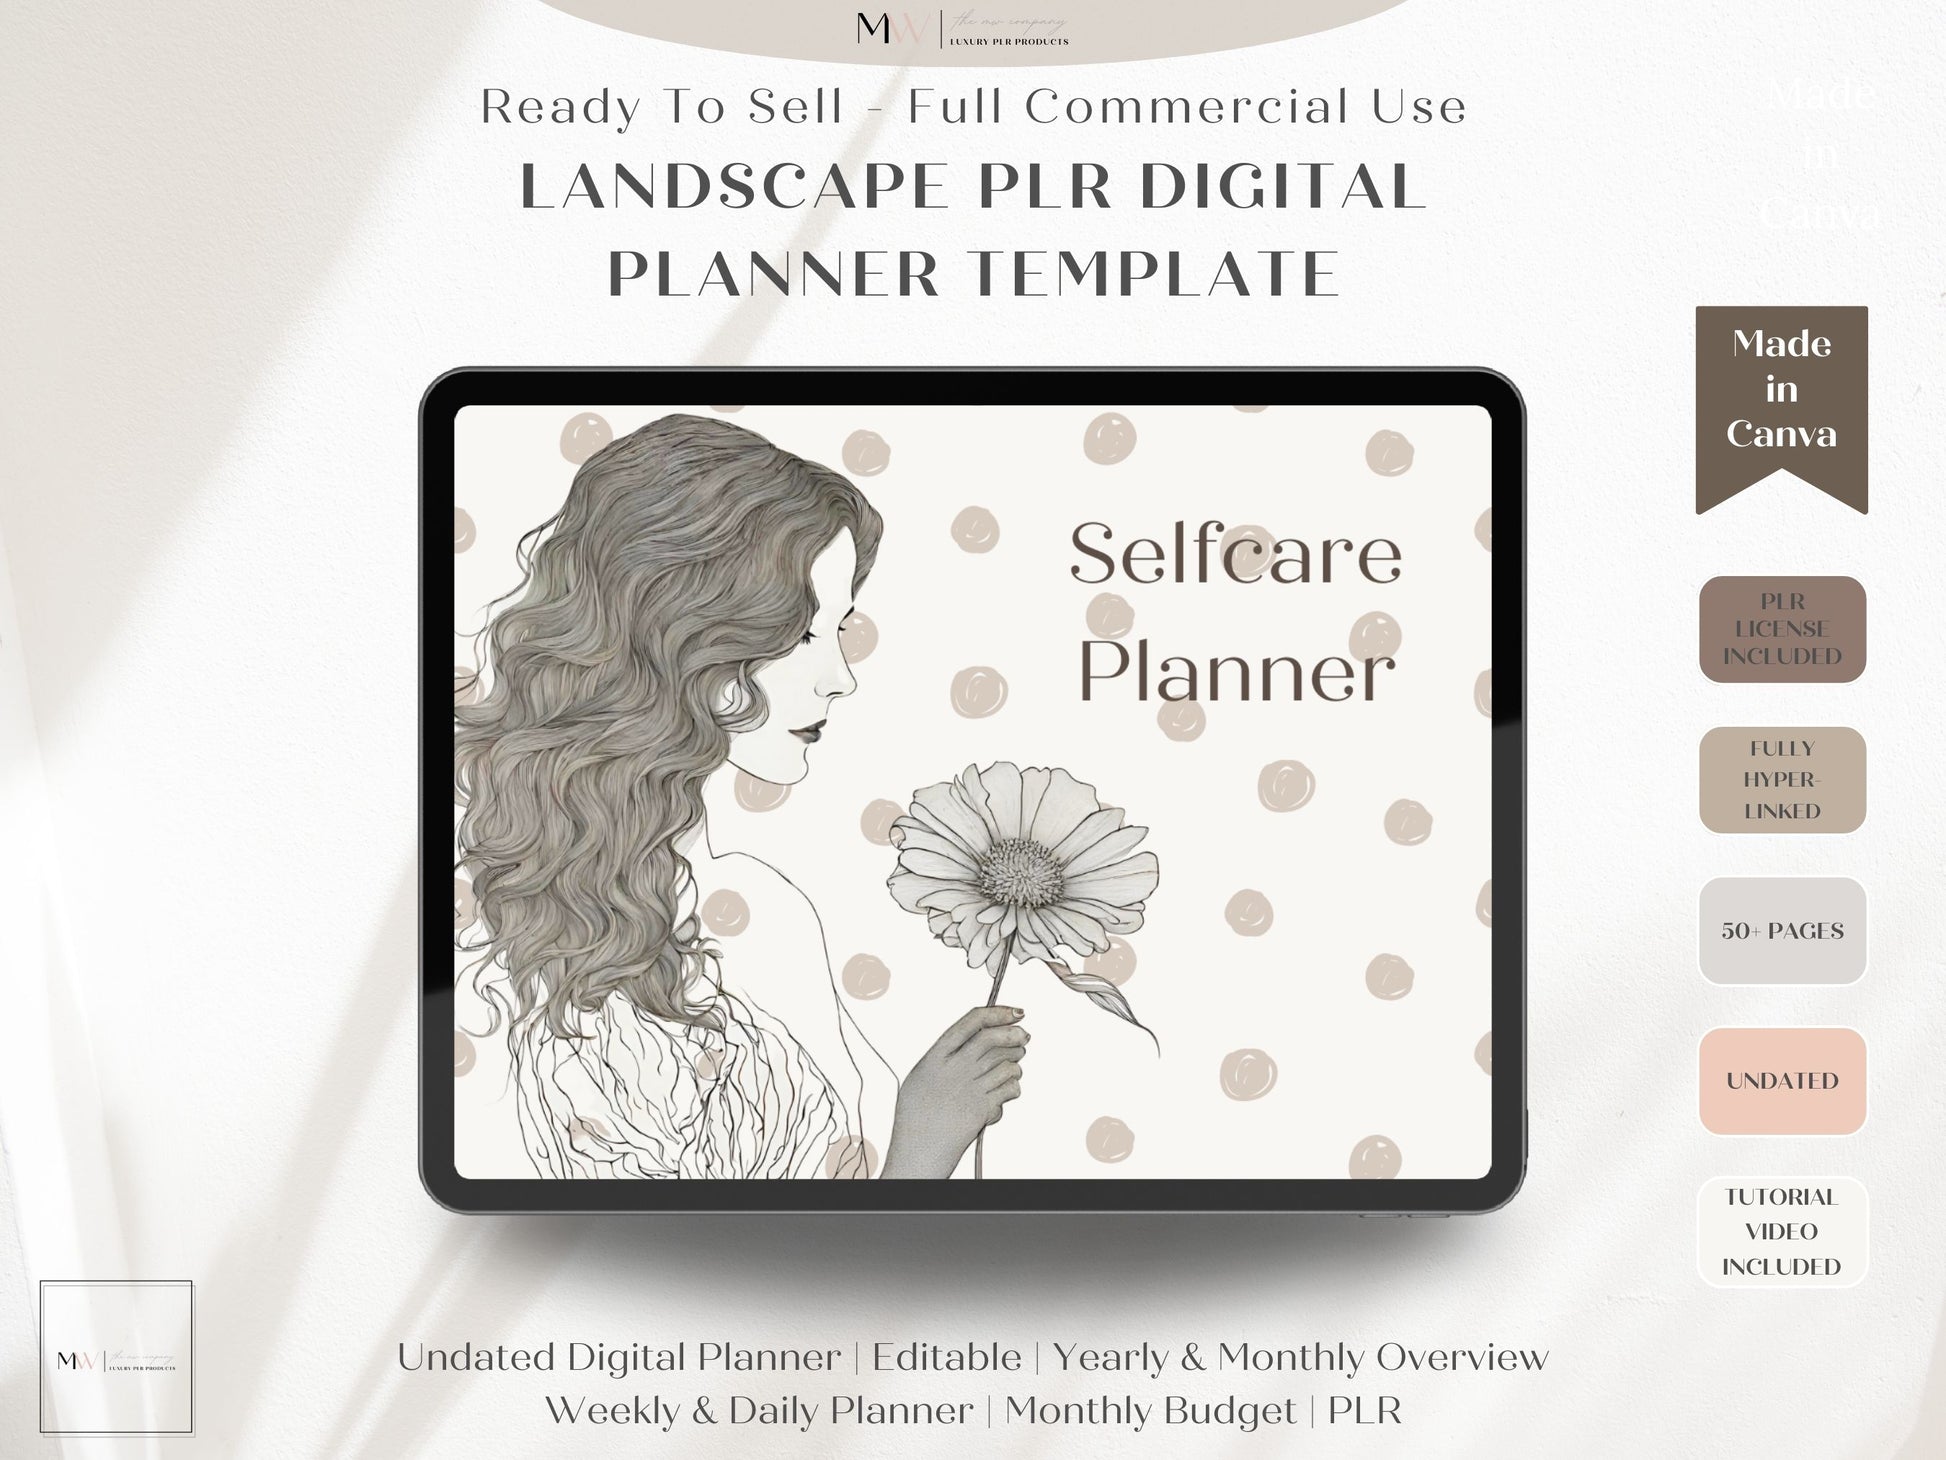 boho neutral tones digital self care planner show on an ipad using goodnotes. Made in canva.